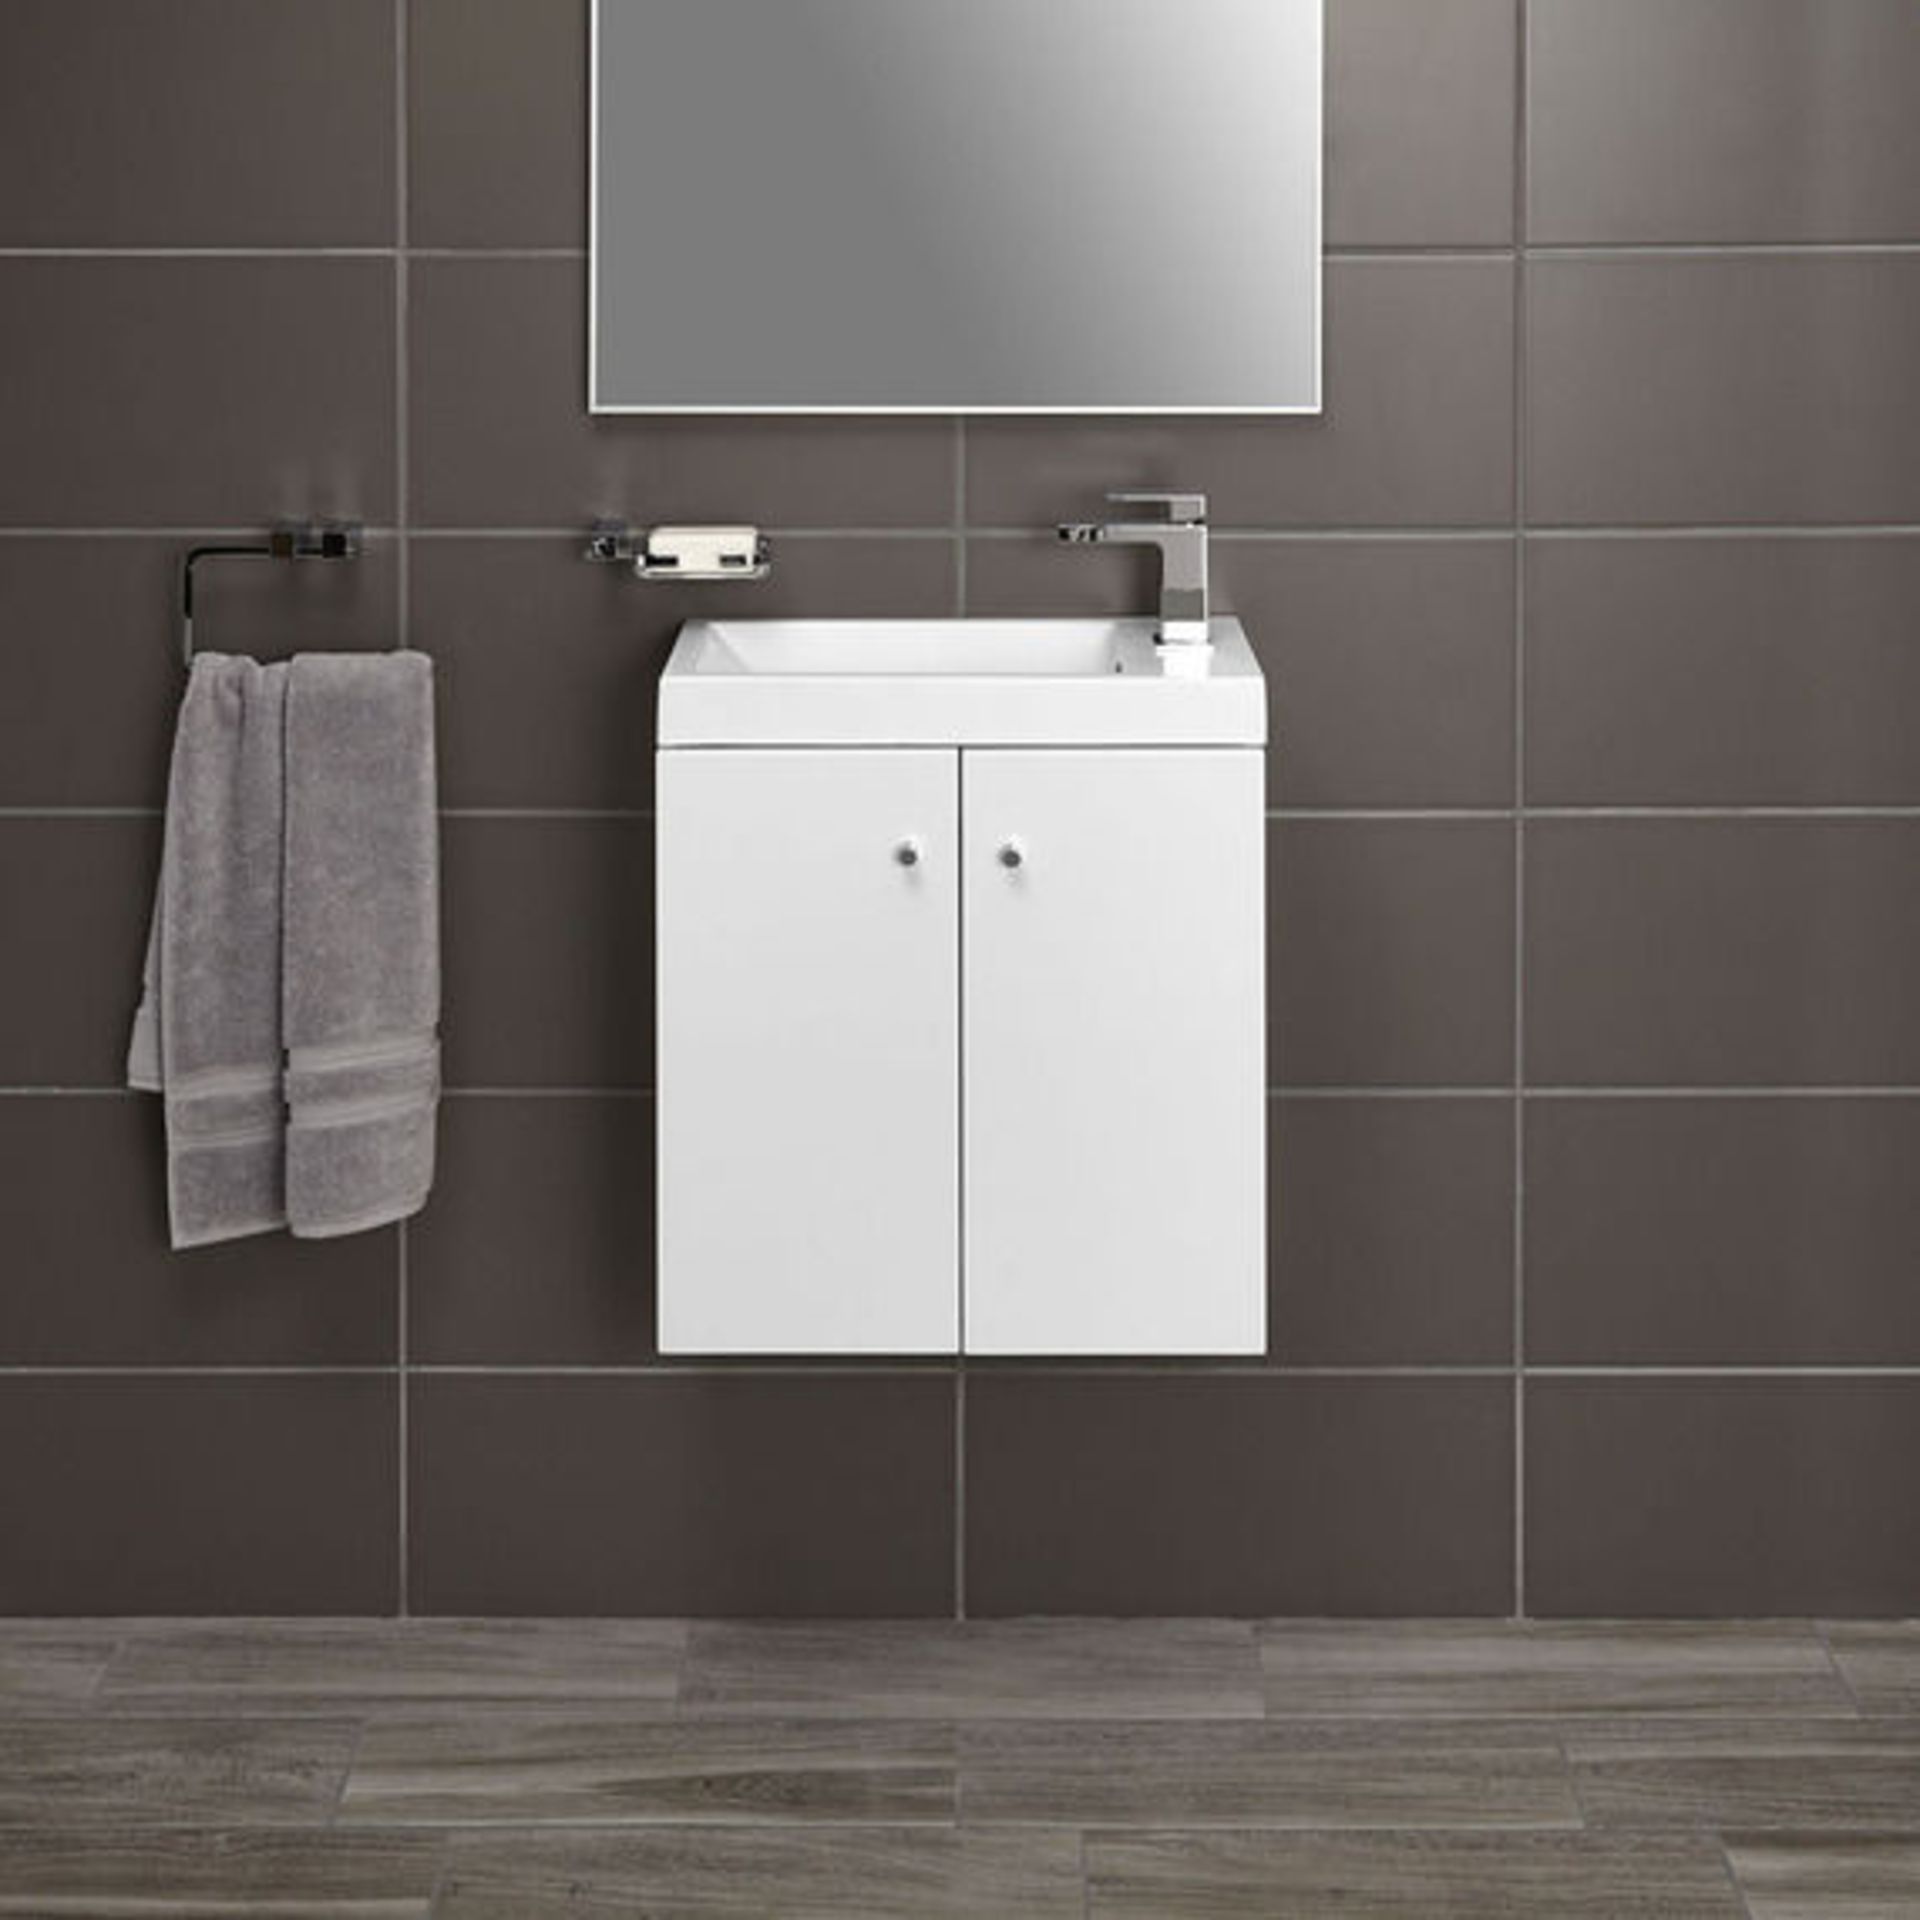 10 x Alpine Duo 495 Wall Hung Vanity Unit  - Gloss White - Brand New Boxed Stock - Dimensions: W49.5